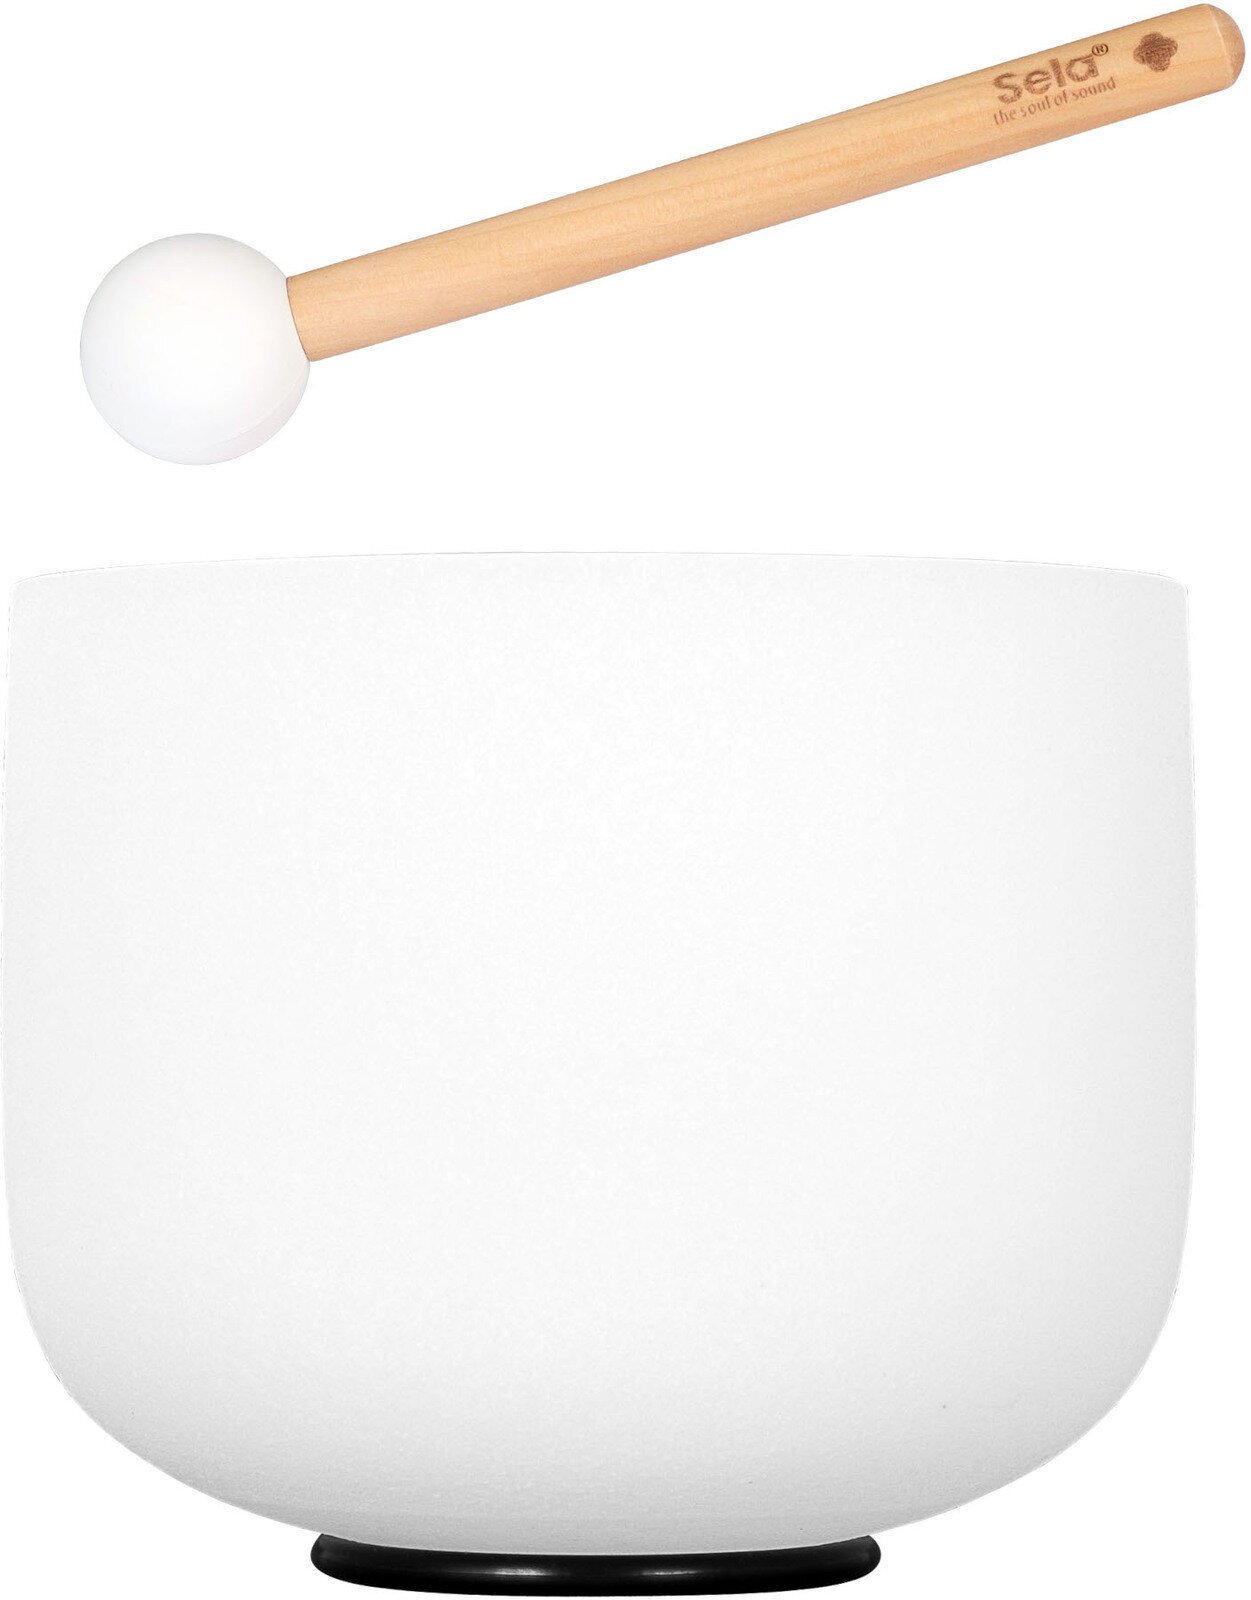 Meditazione e Musicoterapia Sela 8" Crystal Singing Bowl Frosted 440 Hz G incl. 1 Wood Mallet